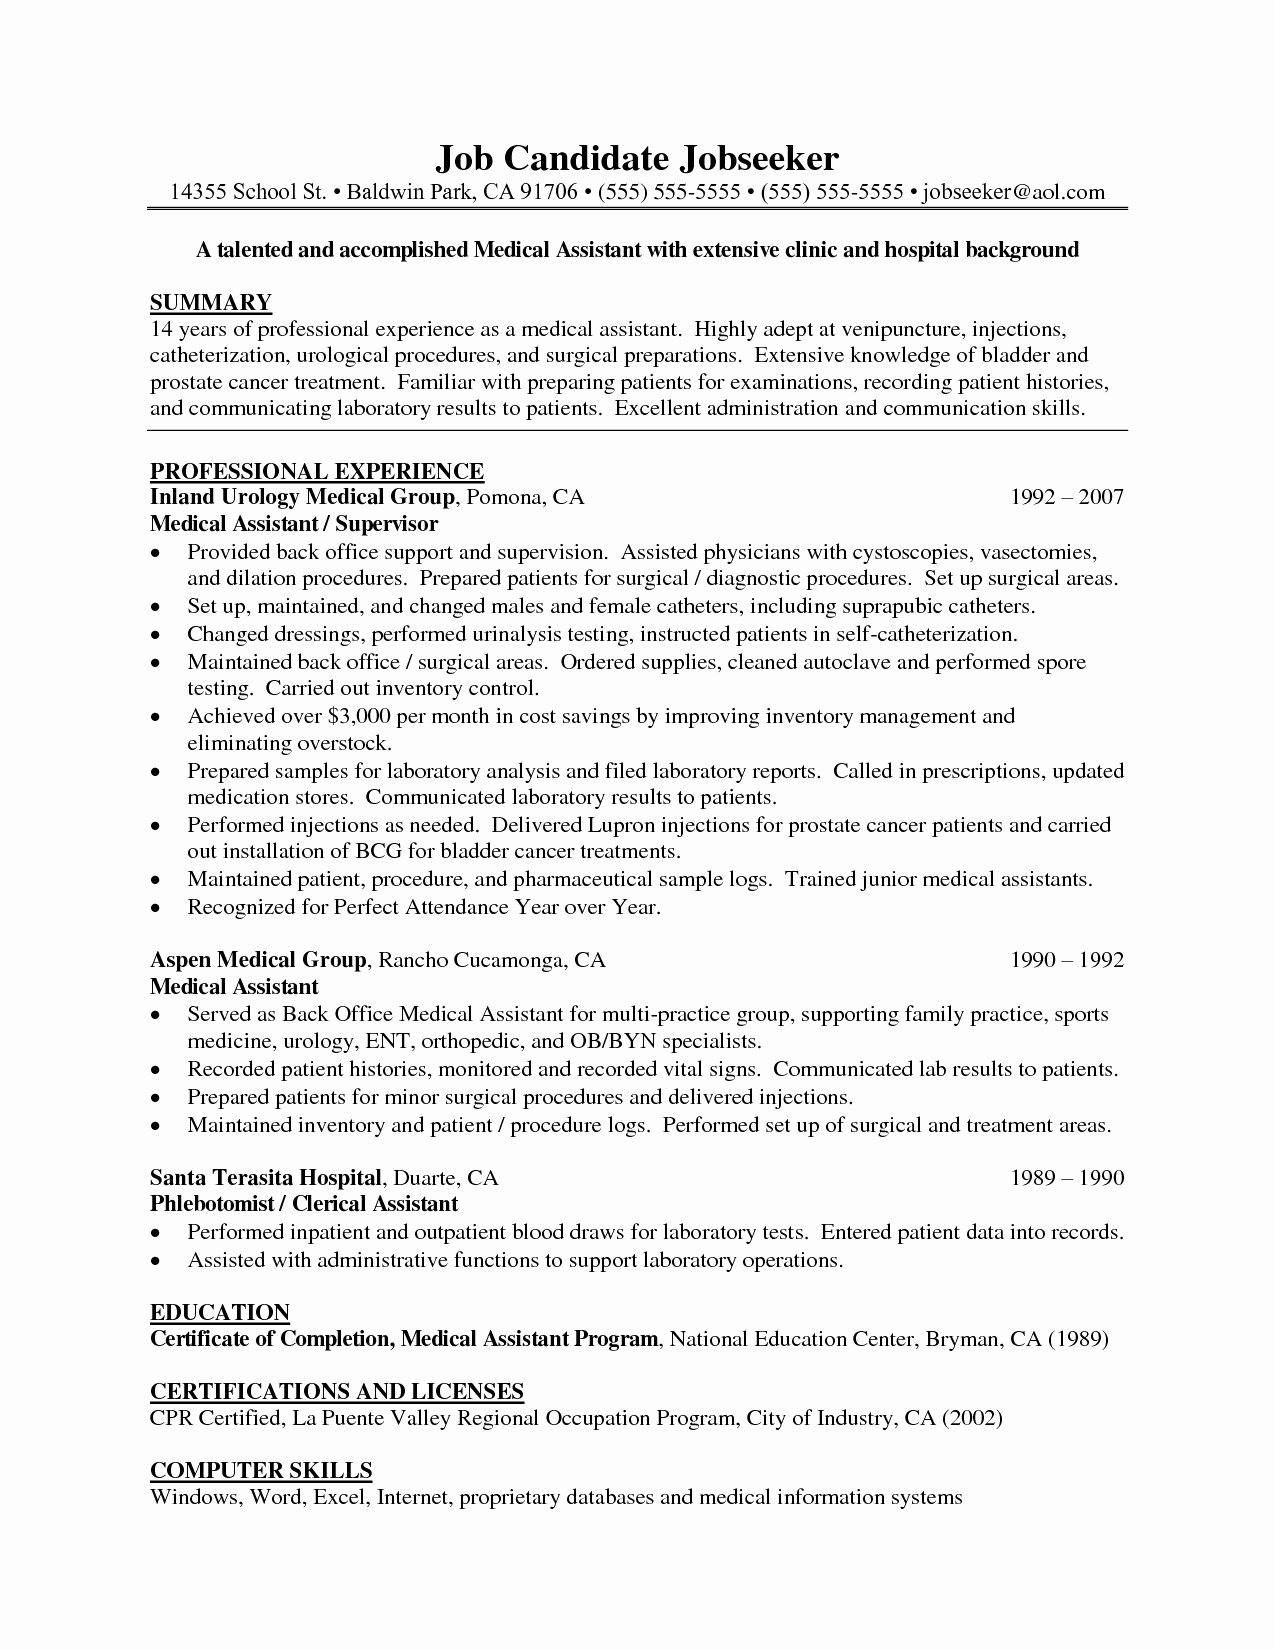 Resume Objective Examples  Nice Sample Objective Pictures General Resume Objective Sample 9